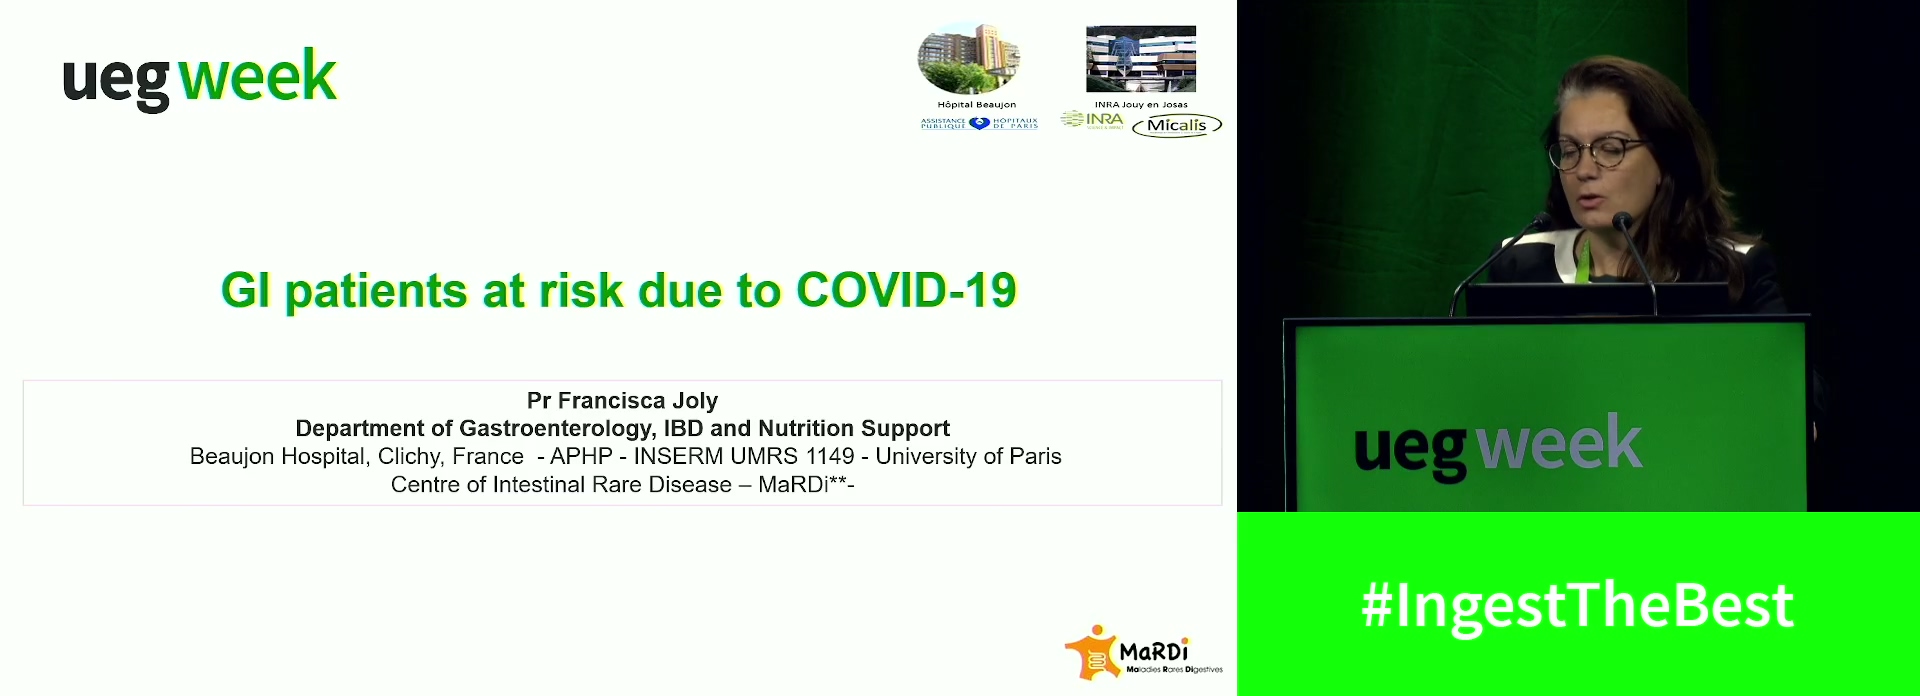 GI patients at risk due to COVID-19